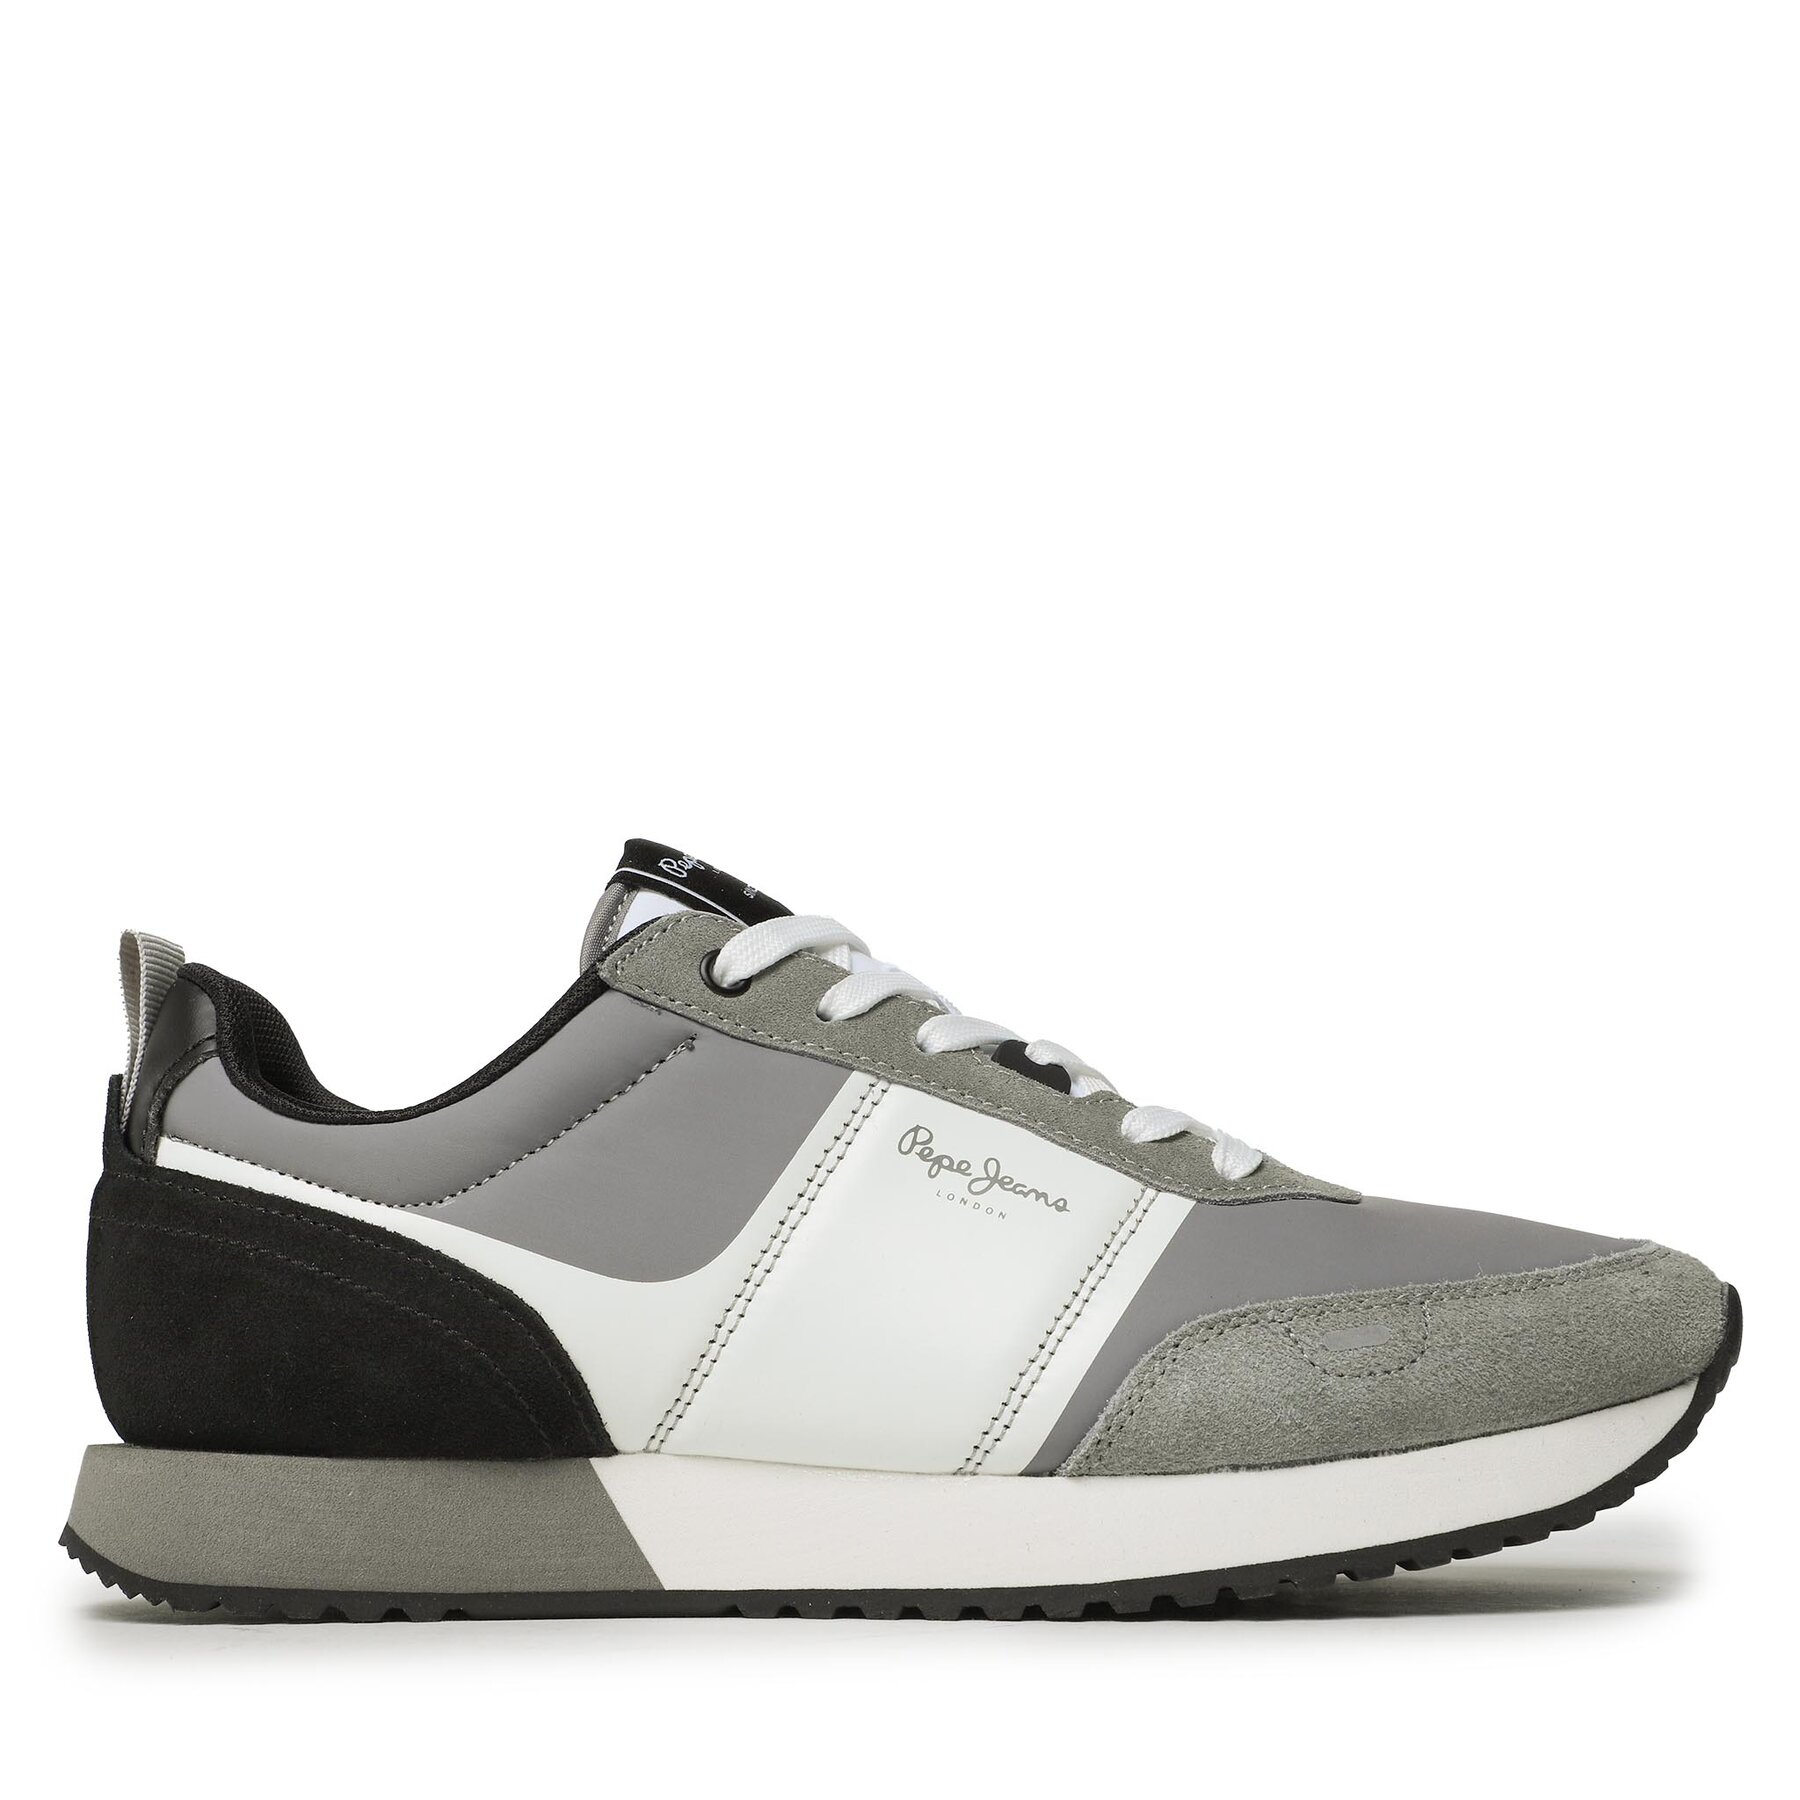 Sneakers Pepe Jeans Tour Transfer PMS30909 Grey 945 von Pepe Jeans